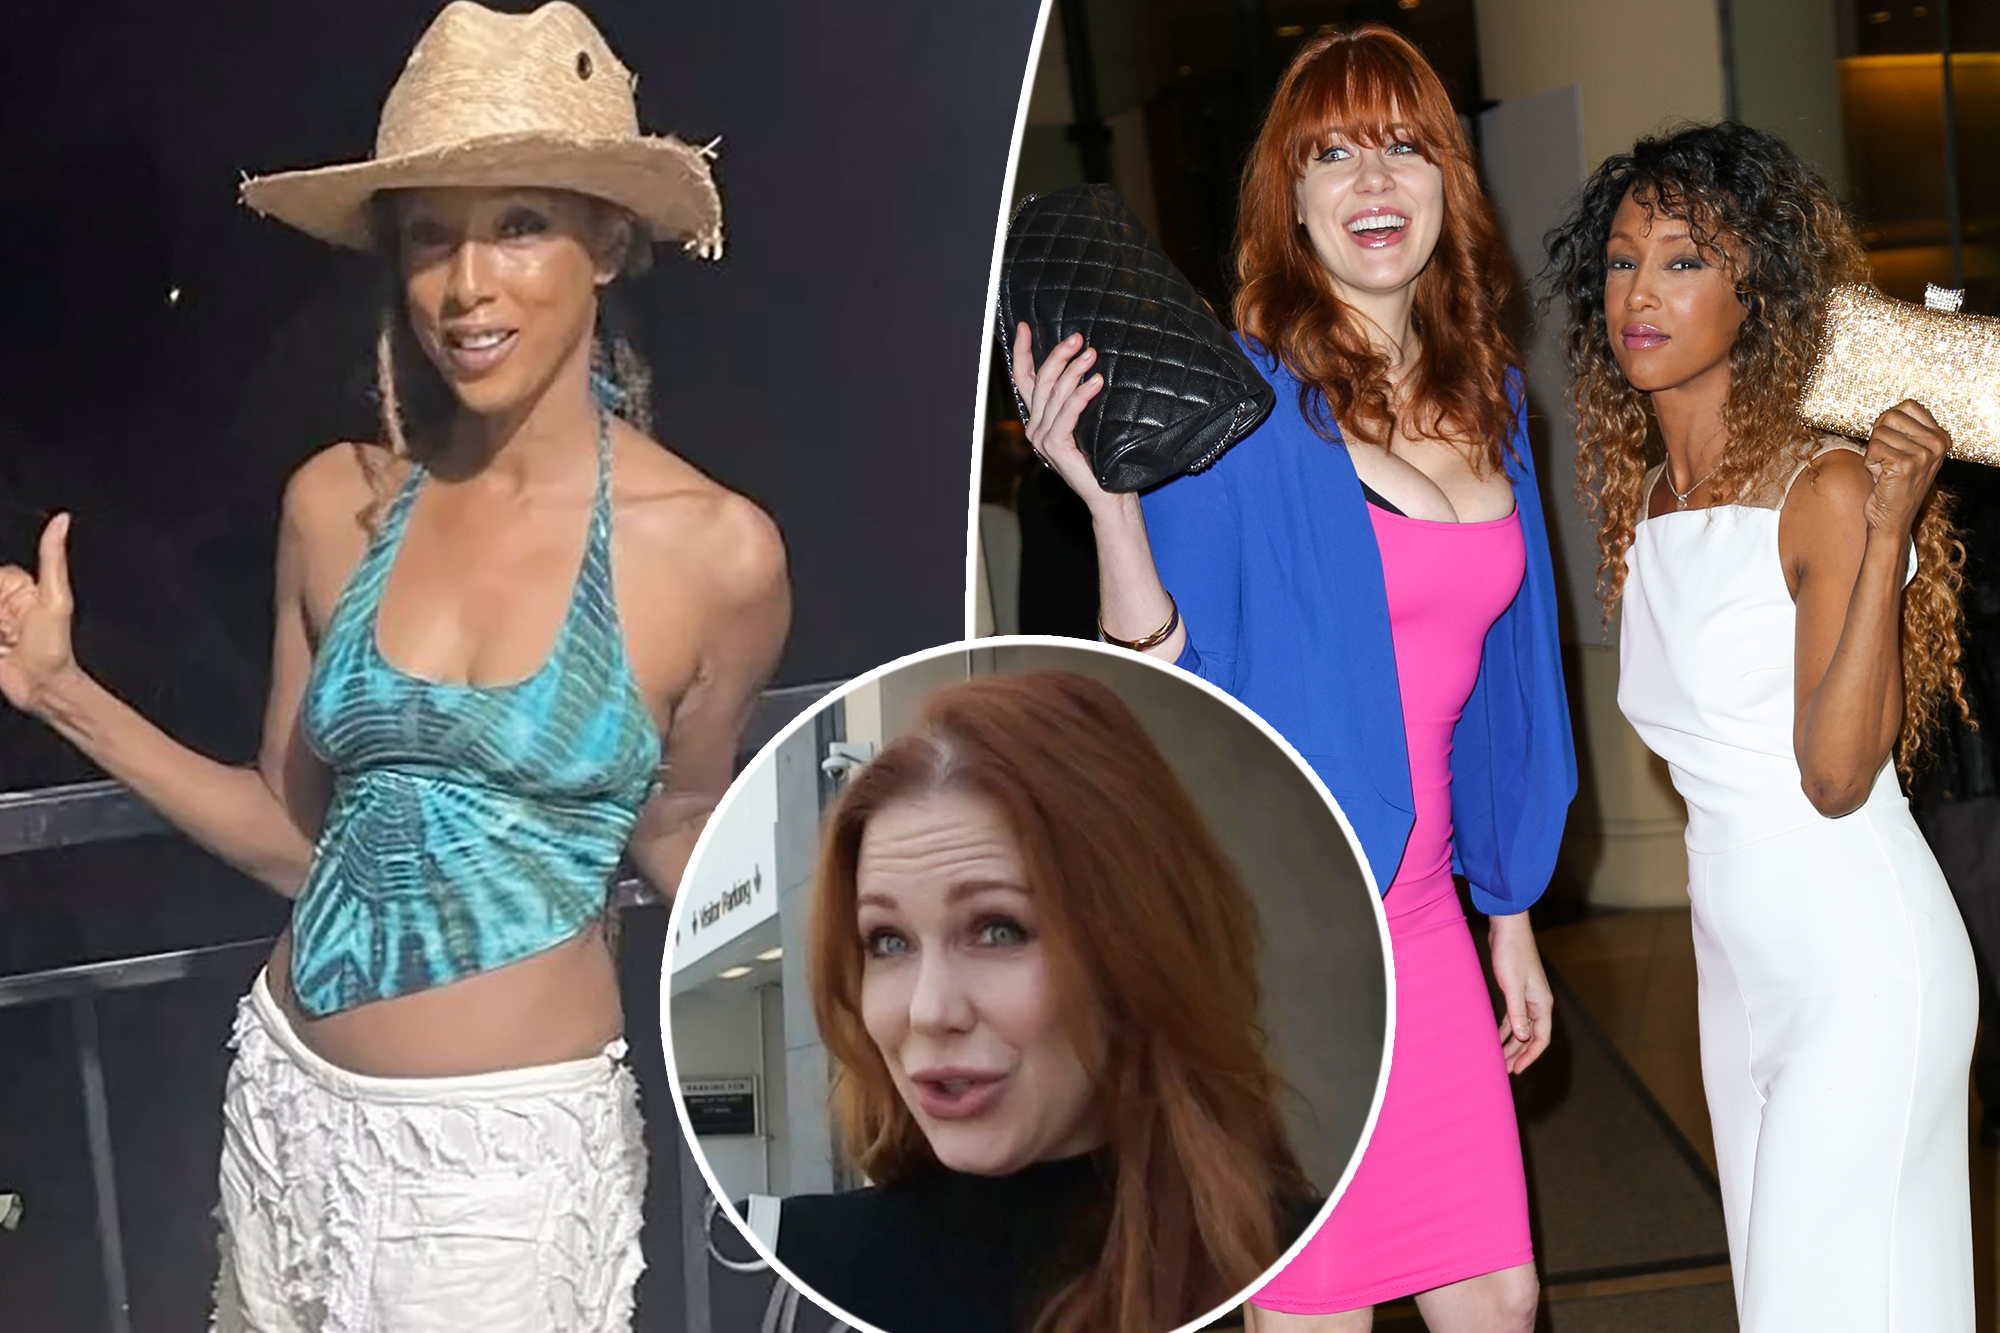 Trina McGee reveals how she got pregnant at 54 — as ‘Boy Meets World’ co-star Maitland Ward expresses doubt